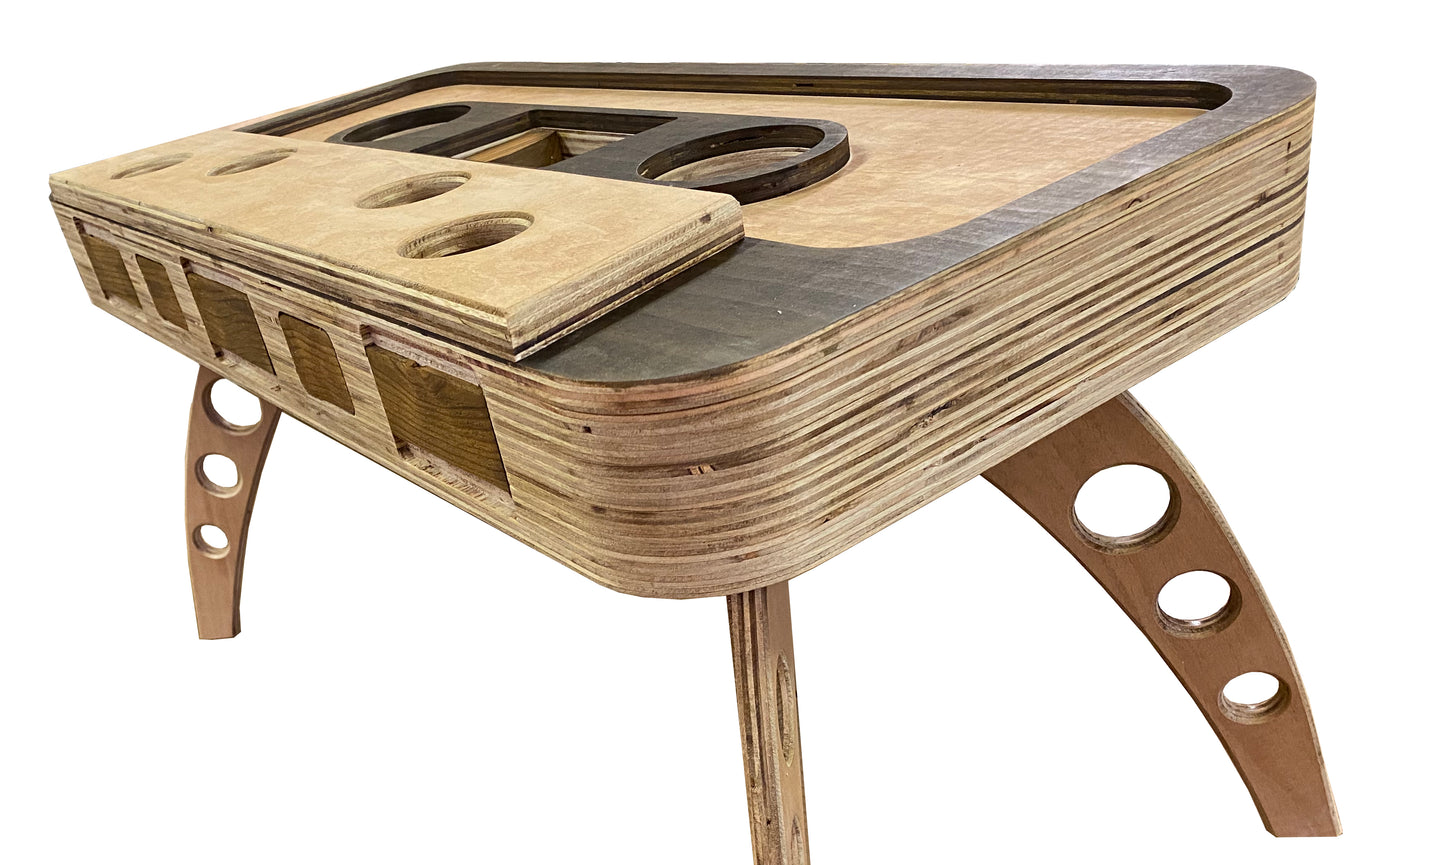 Retro Cassette Coffee Table, Go back in Time and be the Envy of Everyone